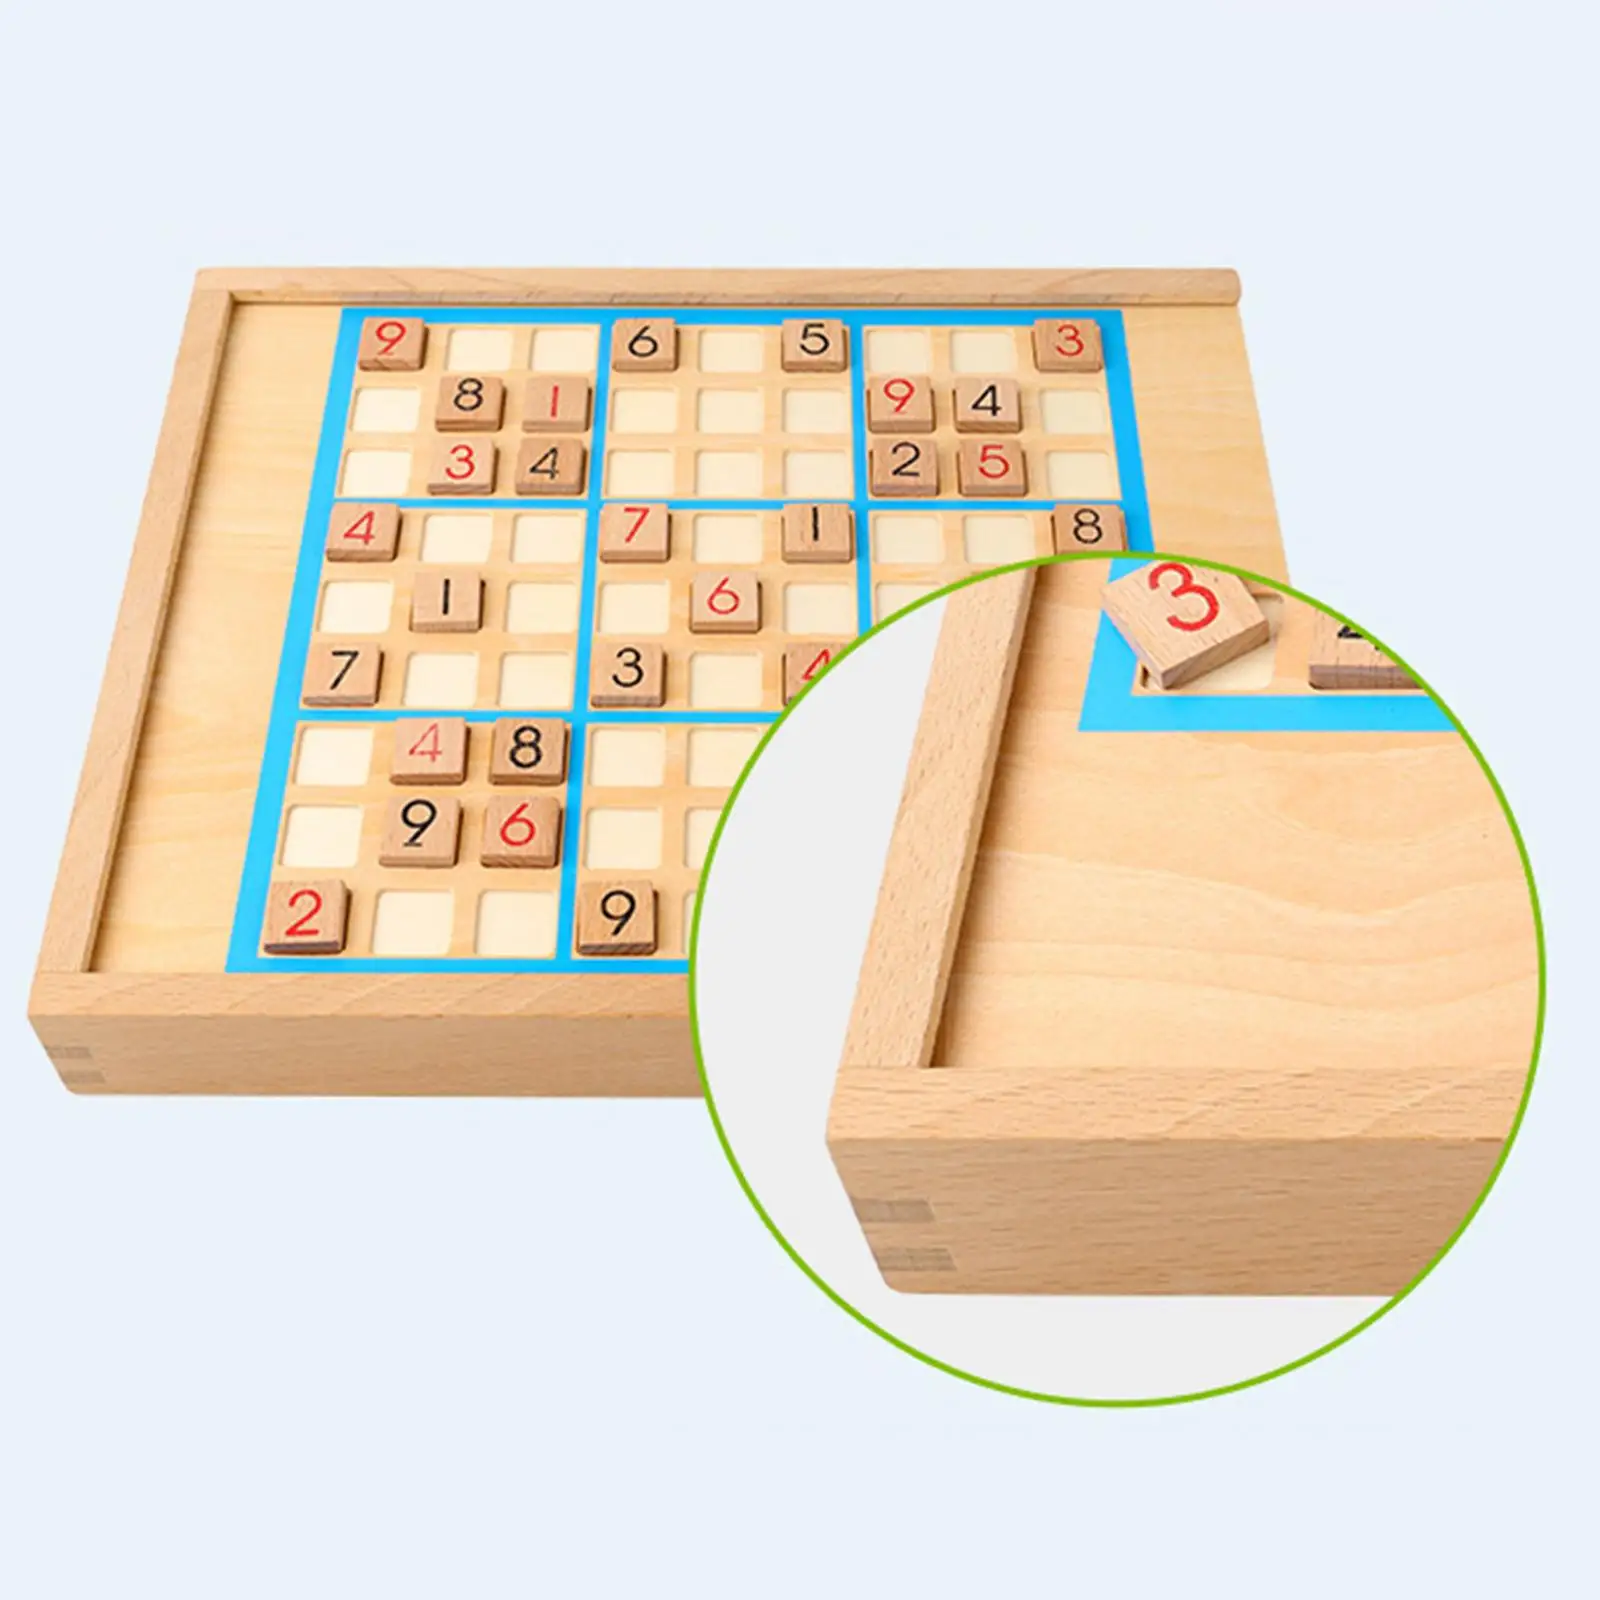 Wooden Chess Board Developmental Numbers Early Educational Toys for Kids Children Birthday Gifts